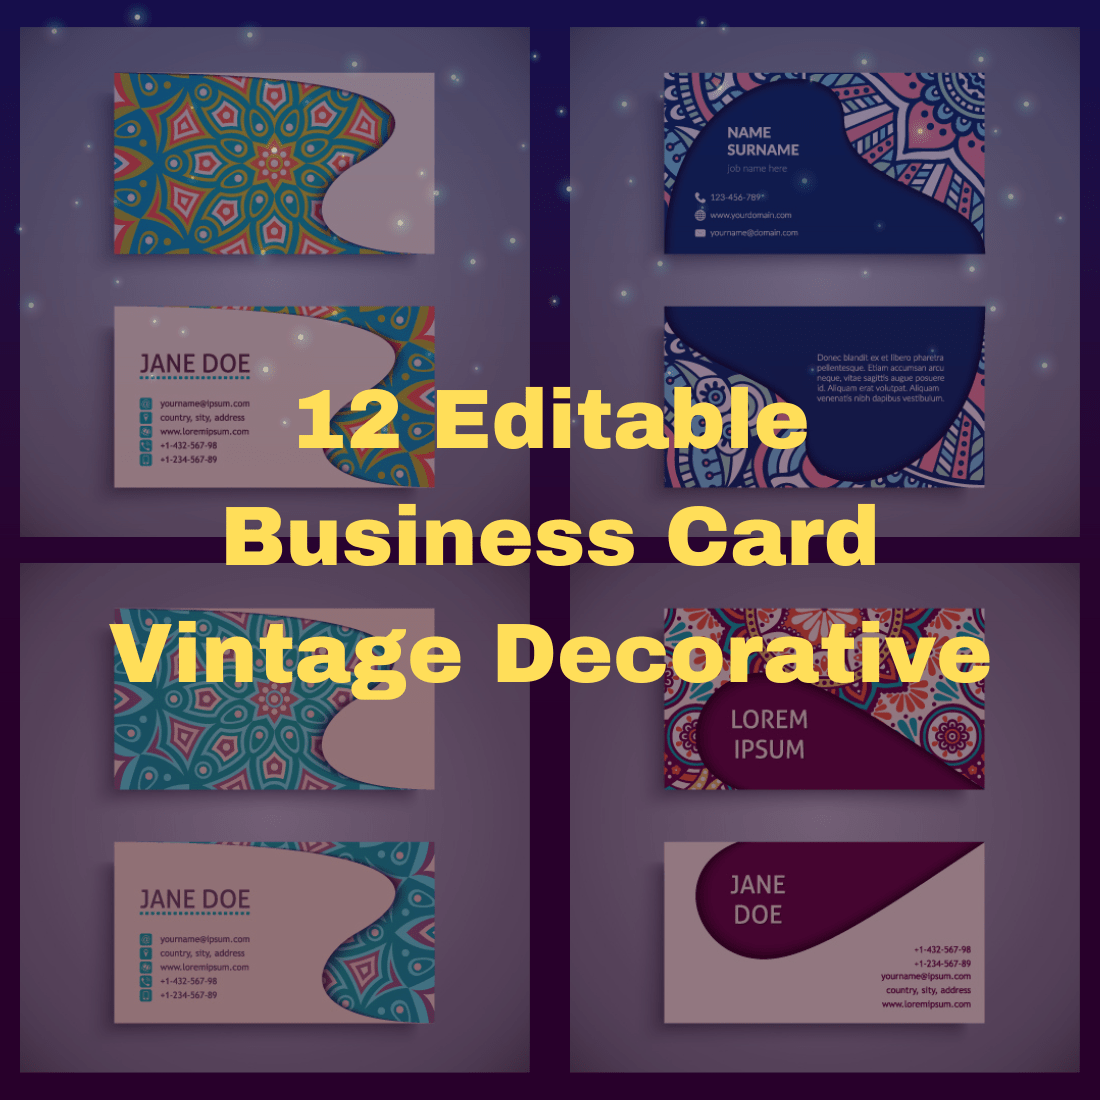 12 Editable Business Card Vintage Decorative - Only $5 cover image.